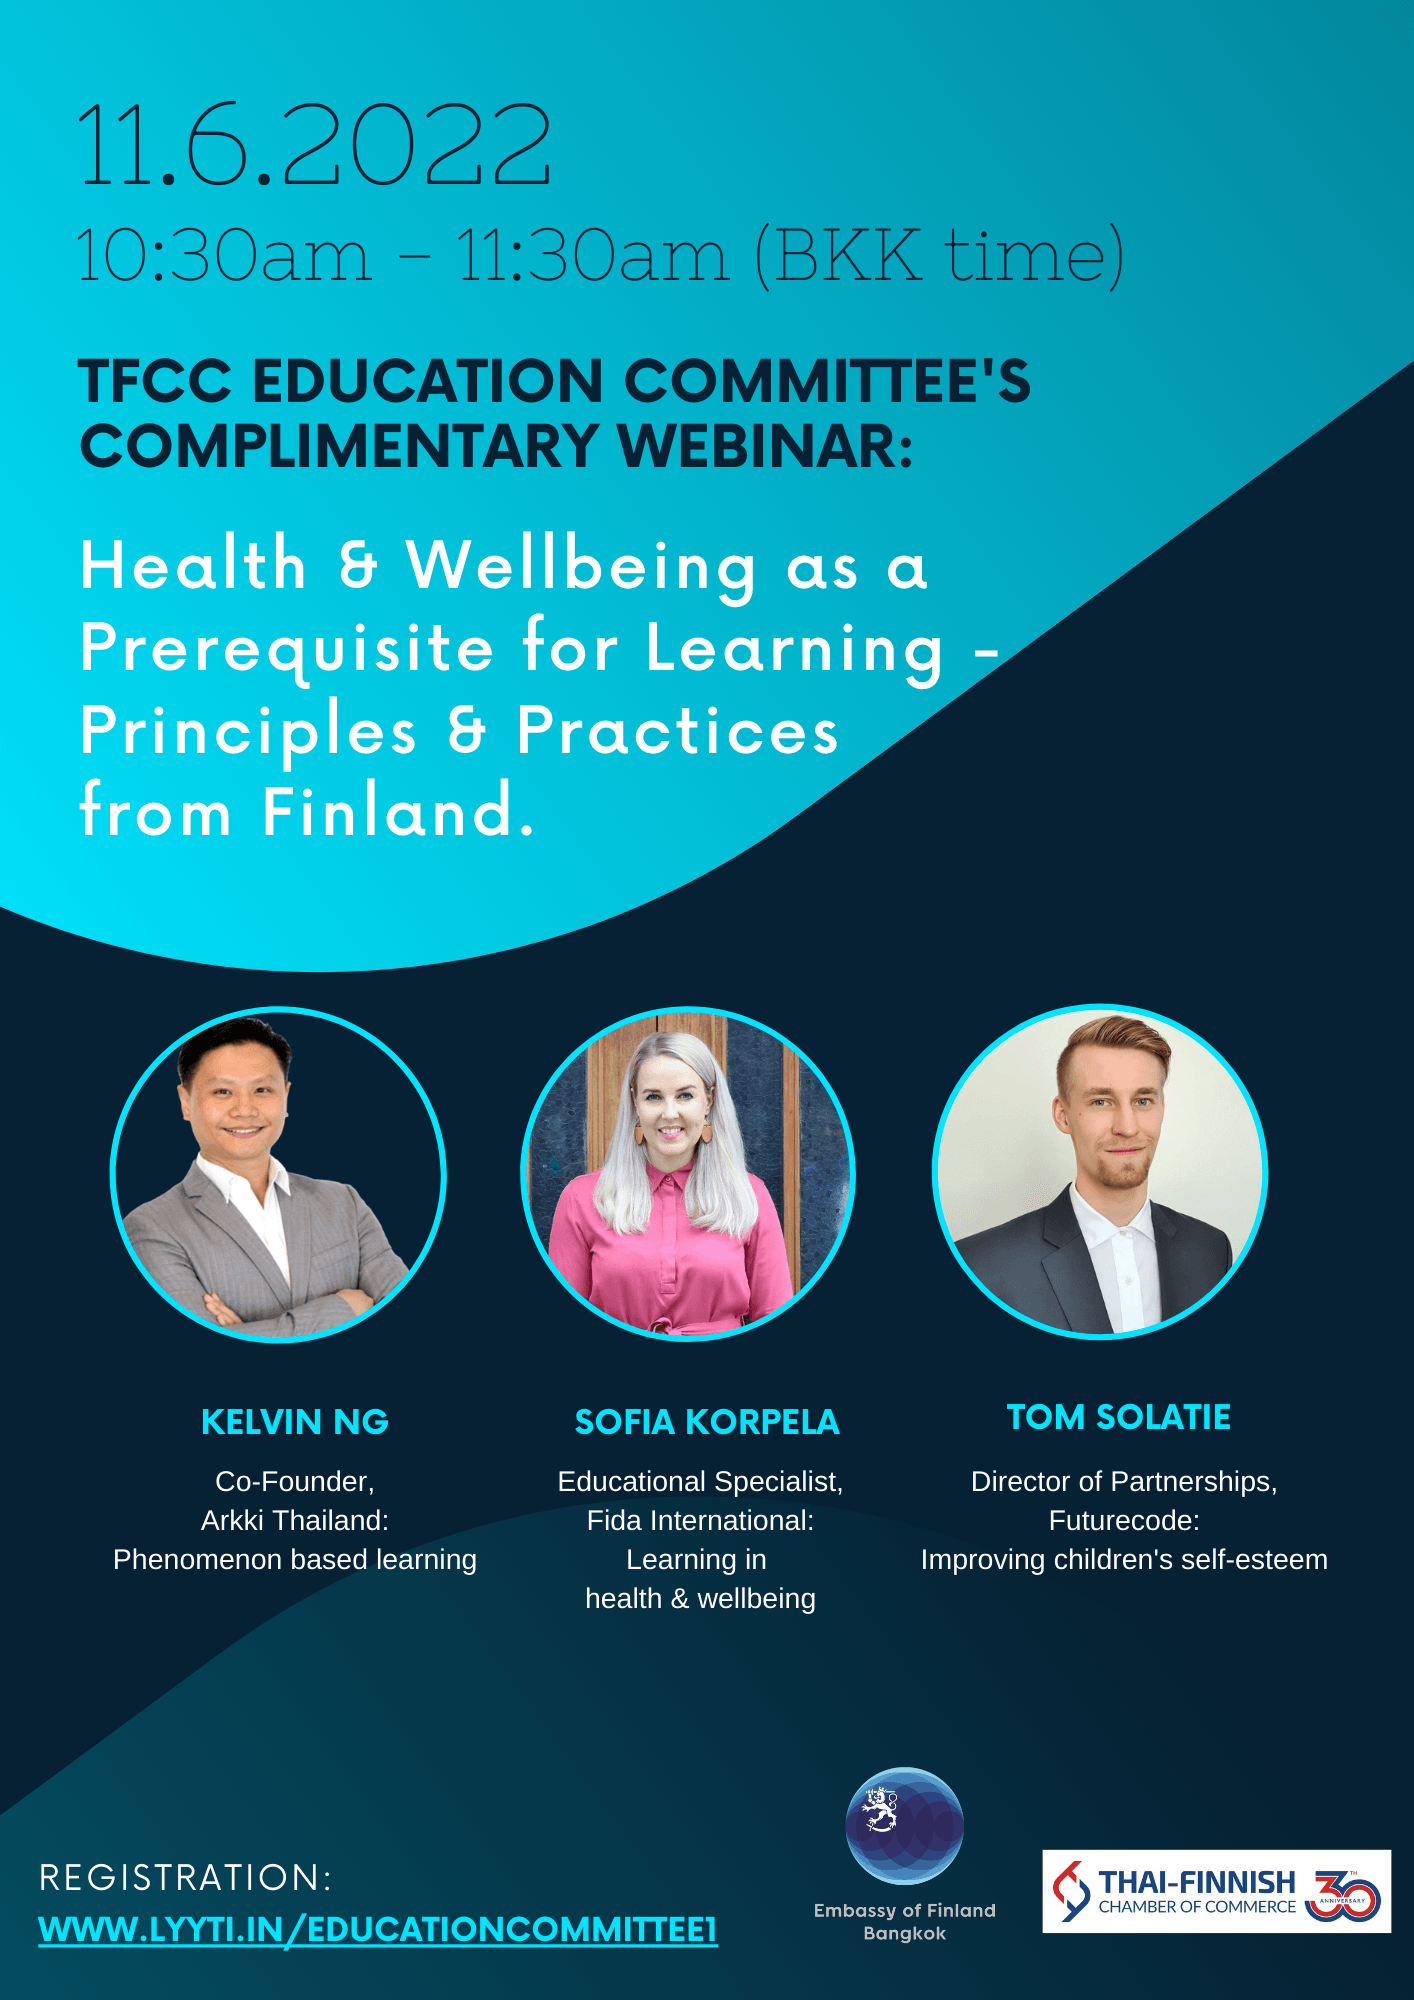 Health & Wellbeing As a Prerequisite for Learning - Principles & Practices from Finland